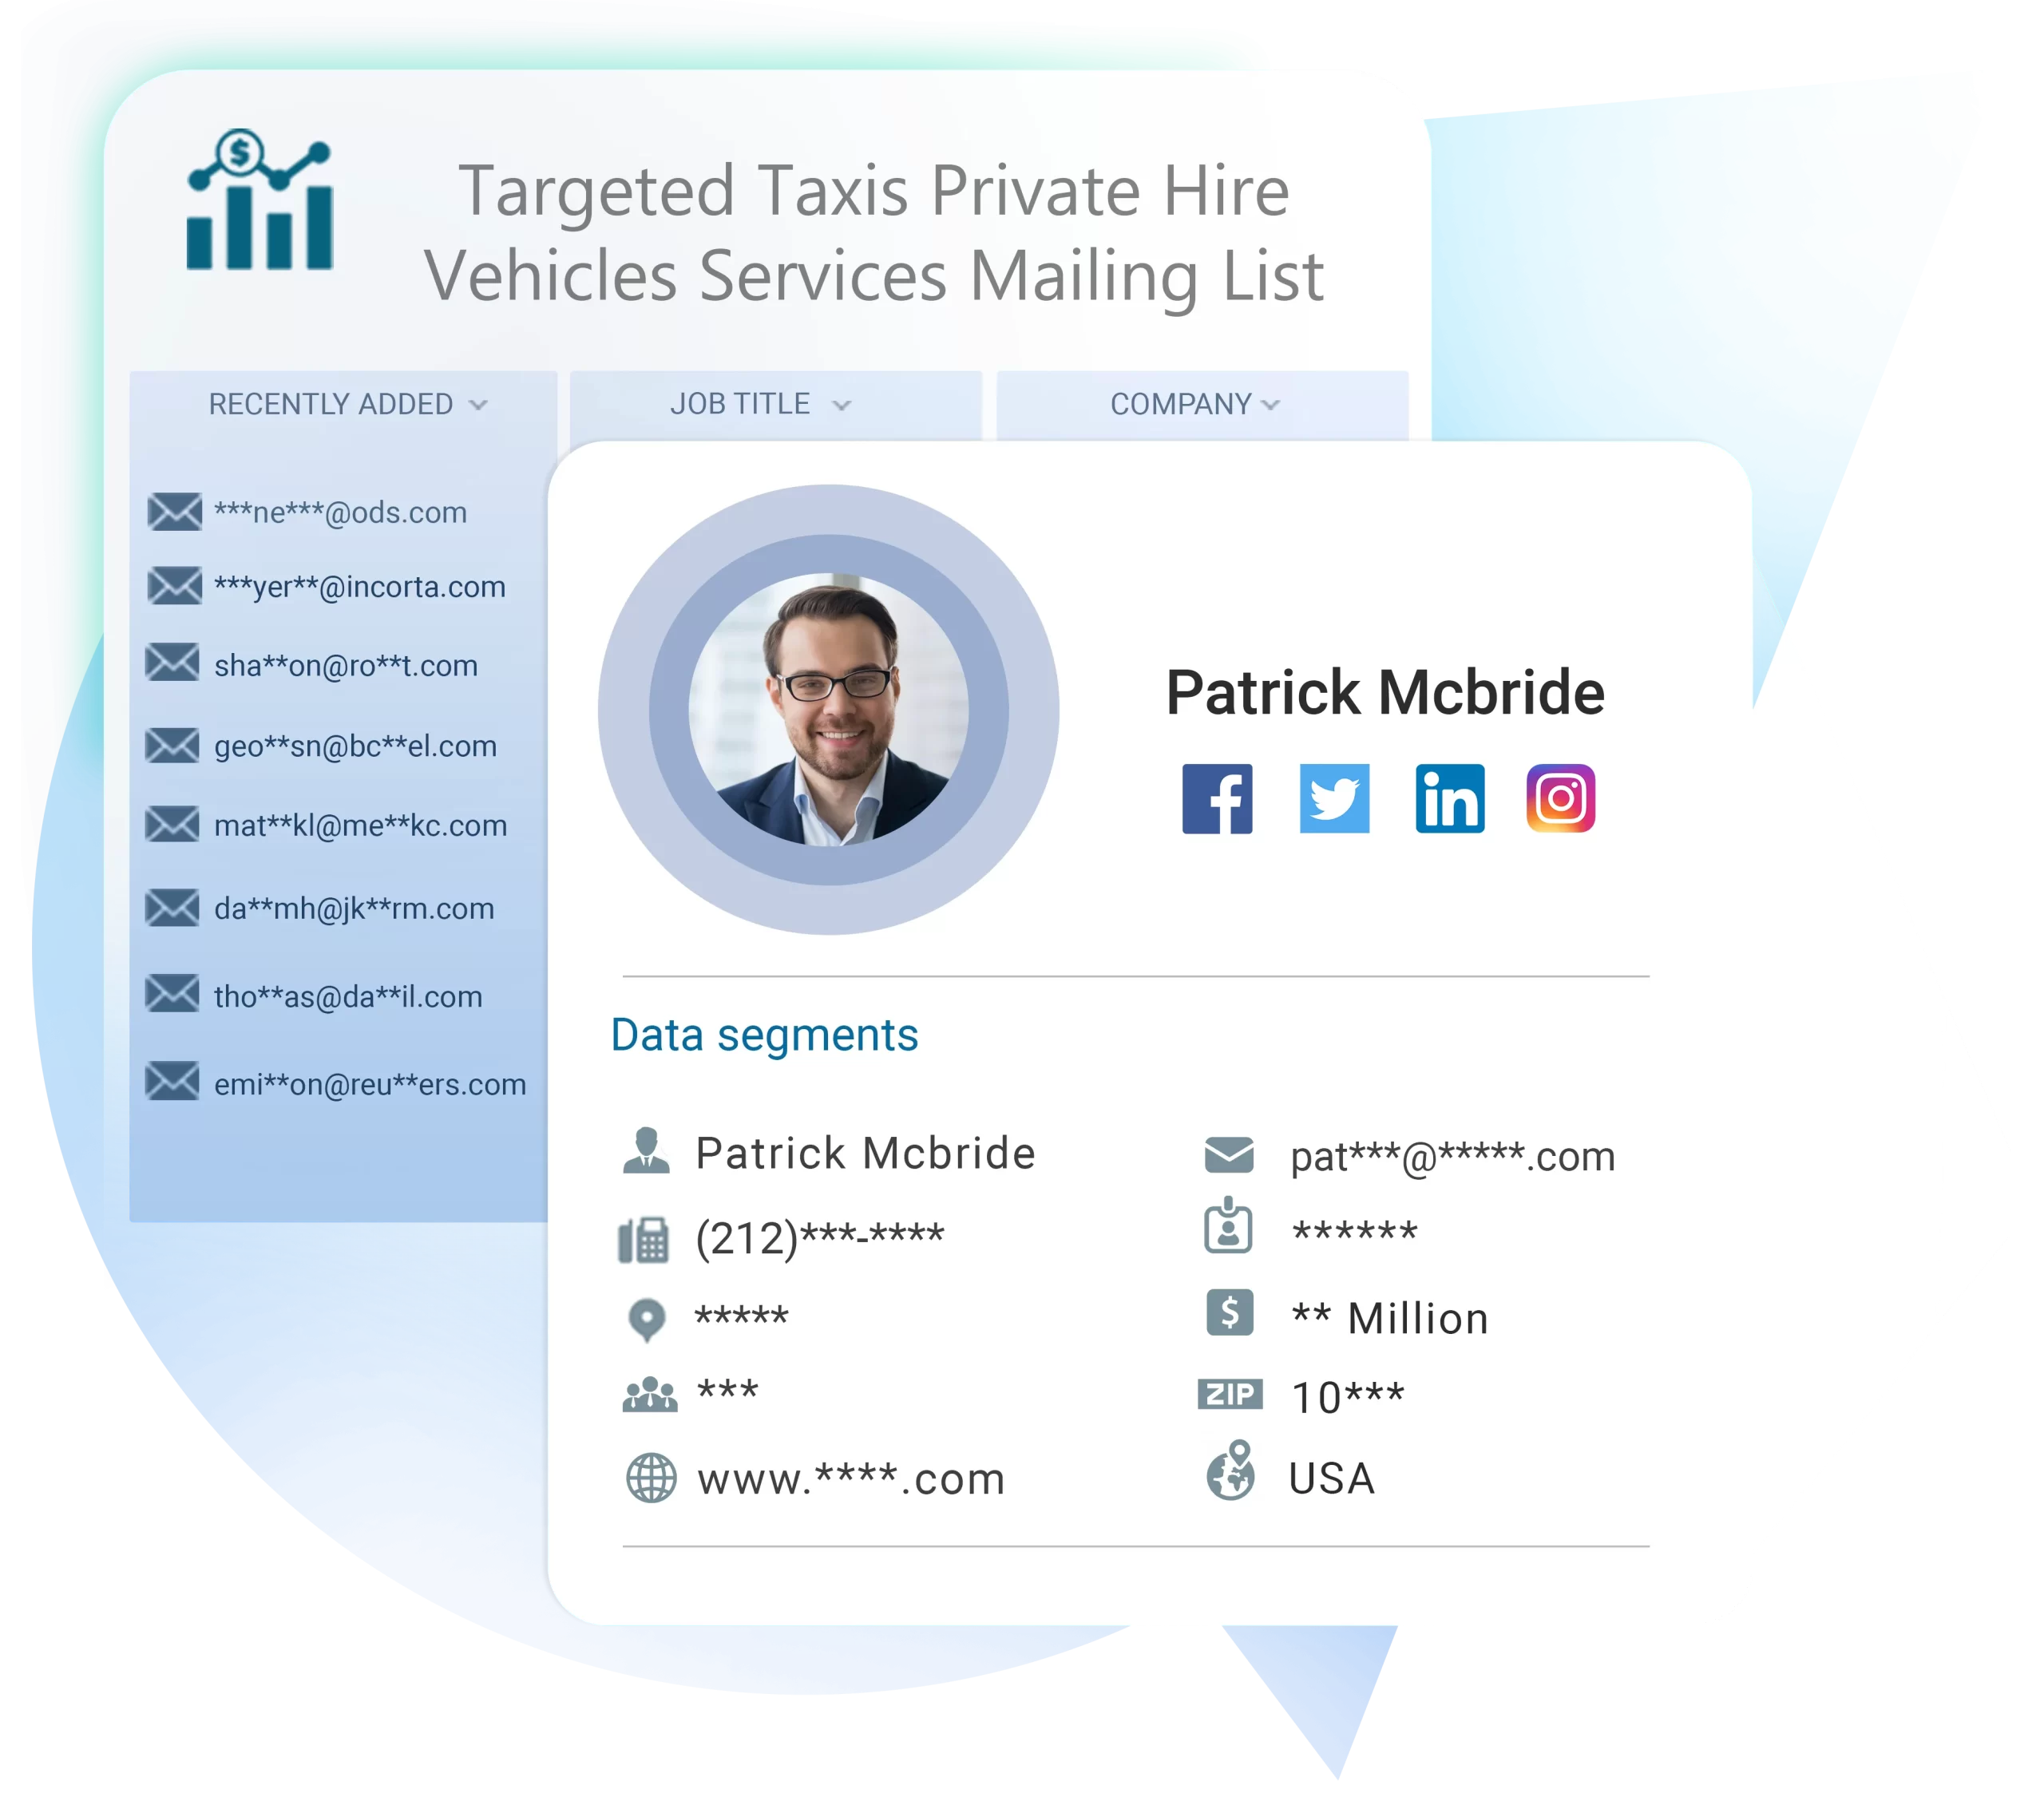 taxis-private-hire-vehicles-services-mailing-list